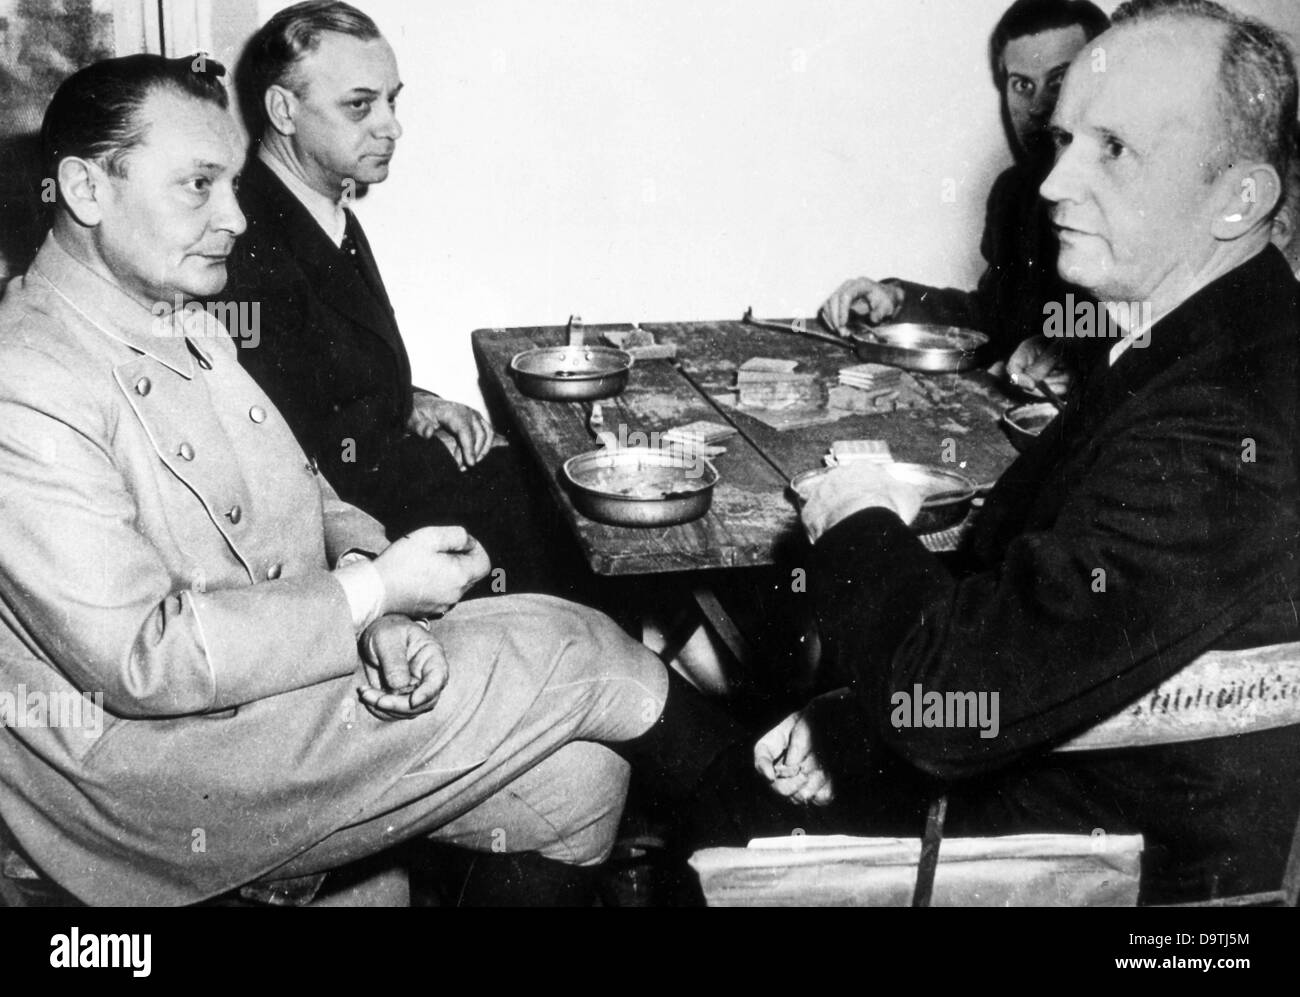 War criminals of the Nazi regime (left to right) Hermann Göring, Alfred Rosenberg, Baldur von Schirach and Karl Dönitz sit at a wooden table with metal plates and pieces of bread during the Nuremberg Trials in 1946.    Photo: Yevgeny Khaldei Stock Photo